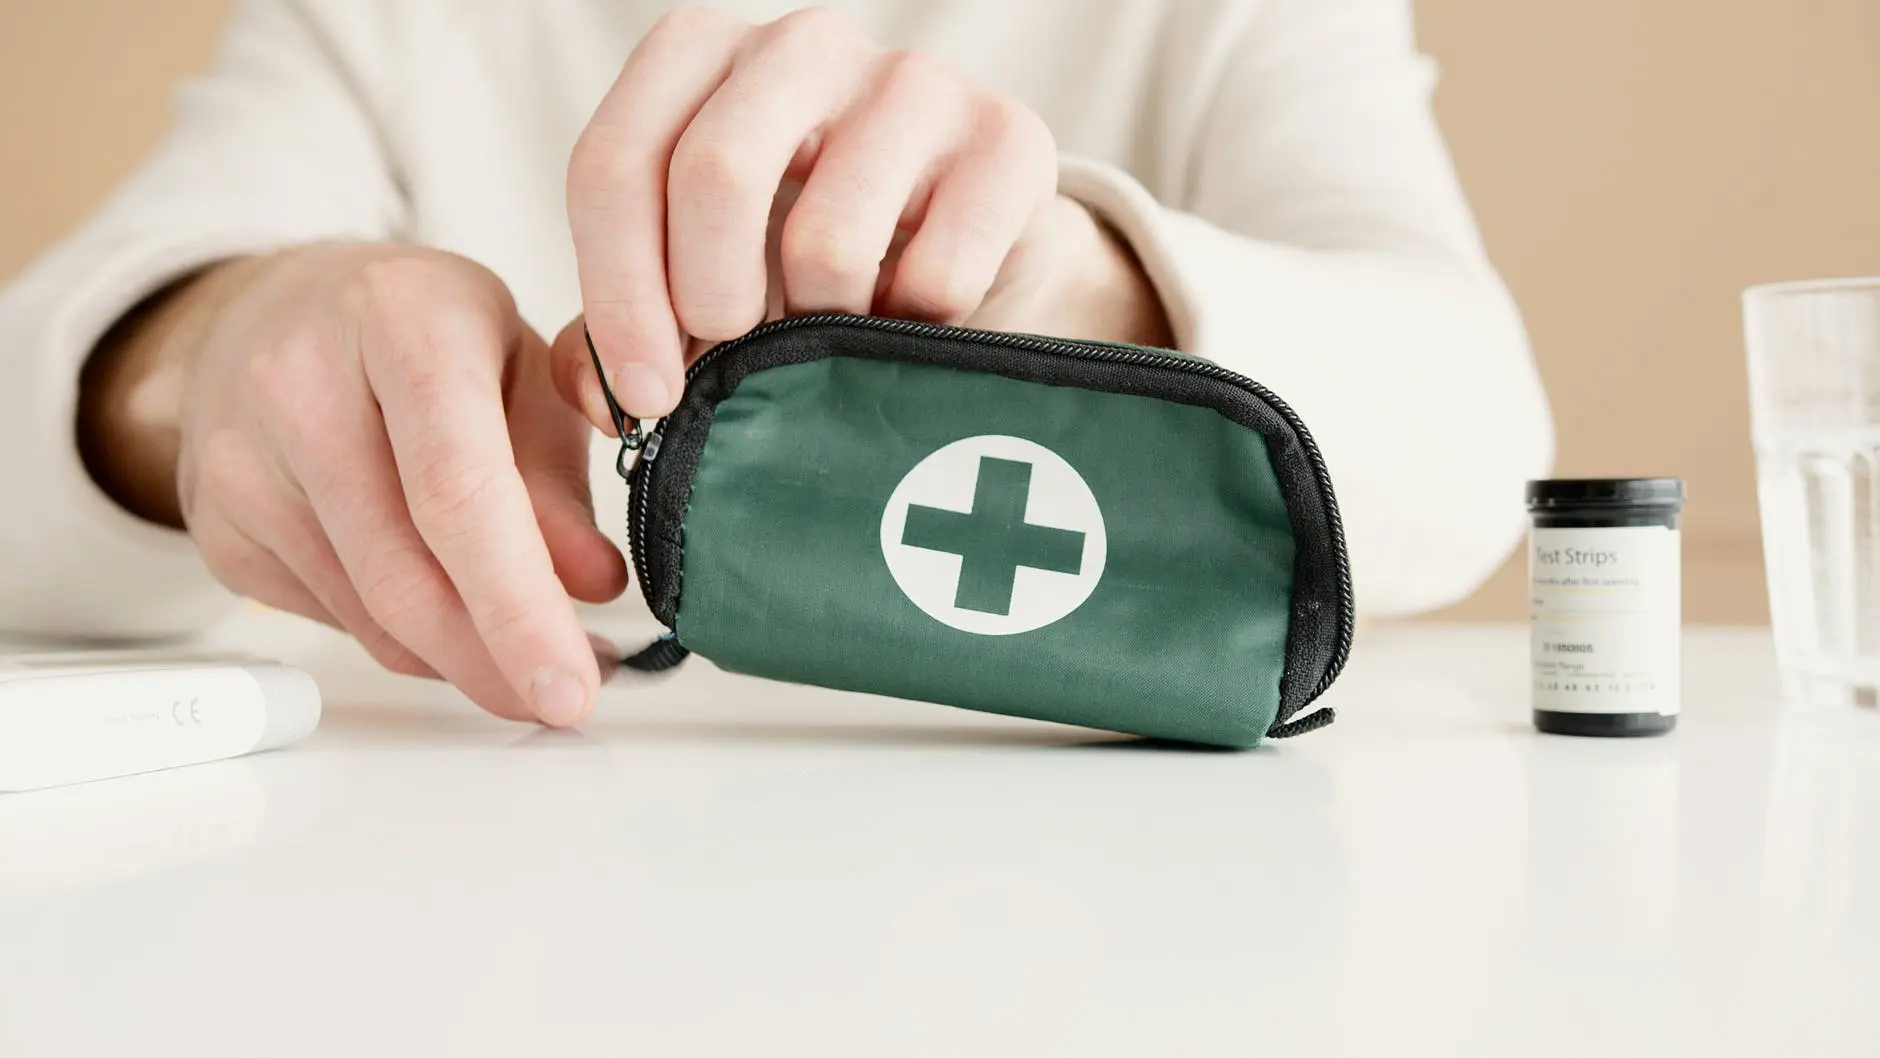 A doctor that is zipping up a first aid kit.